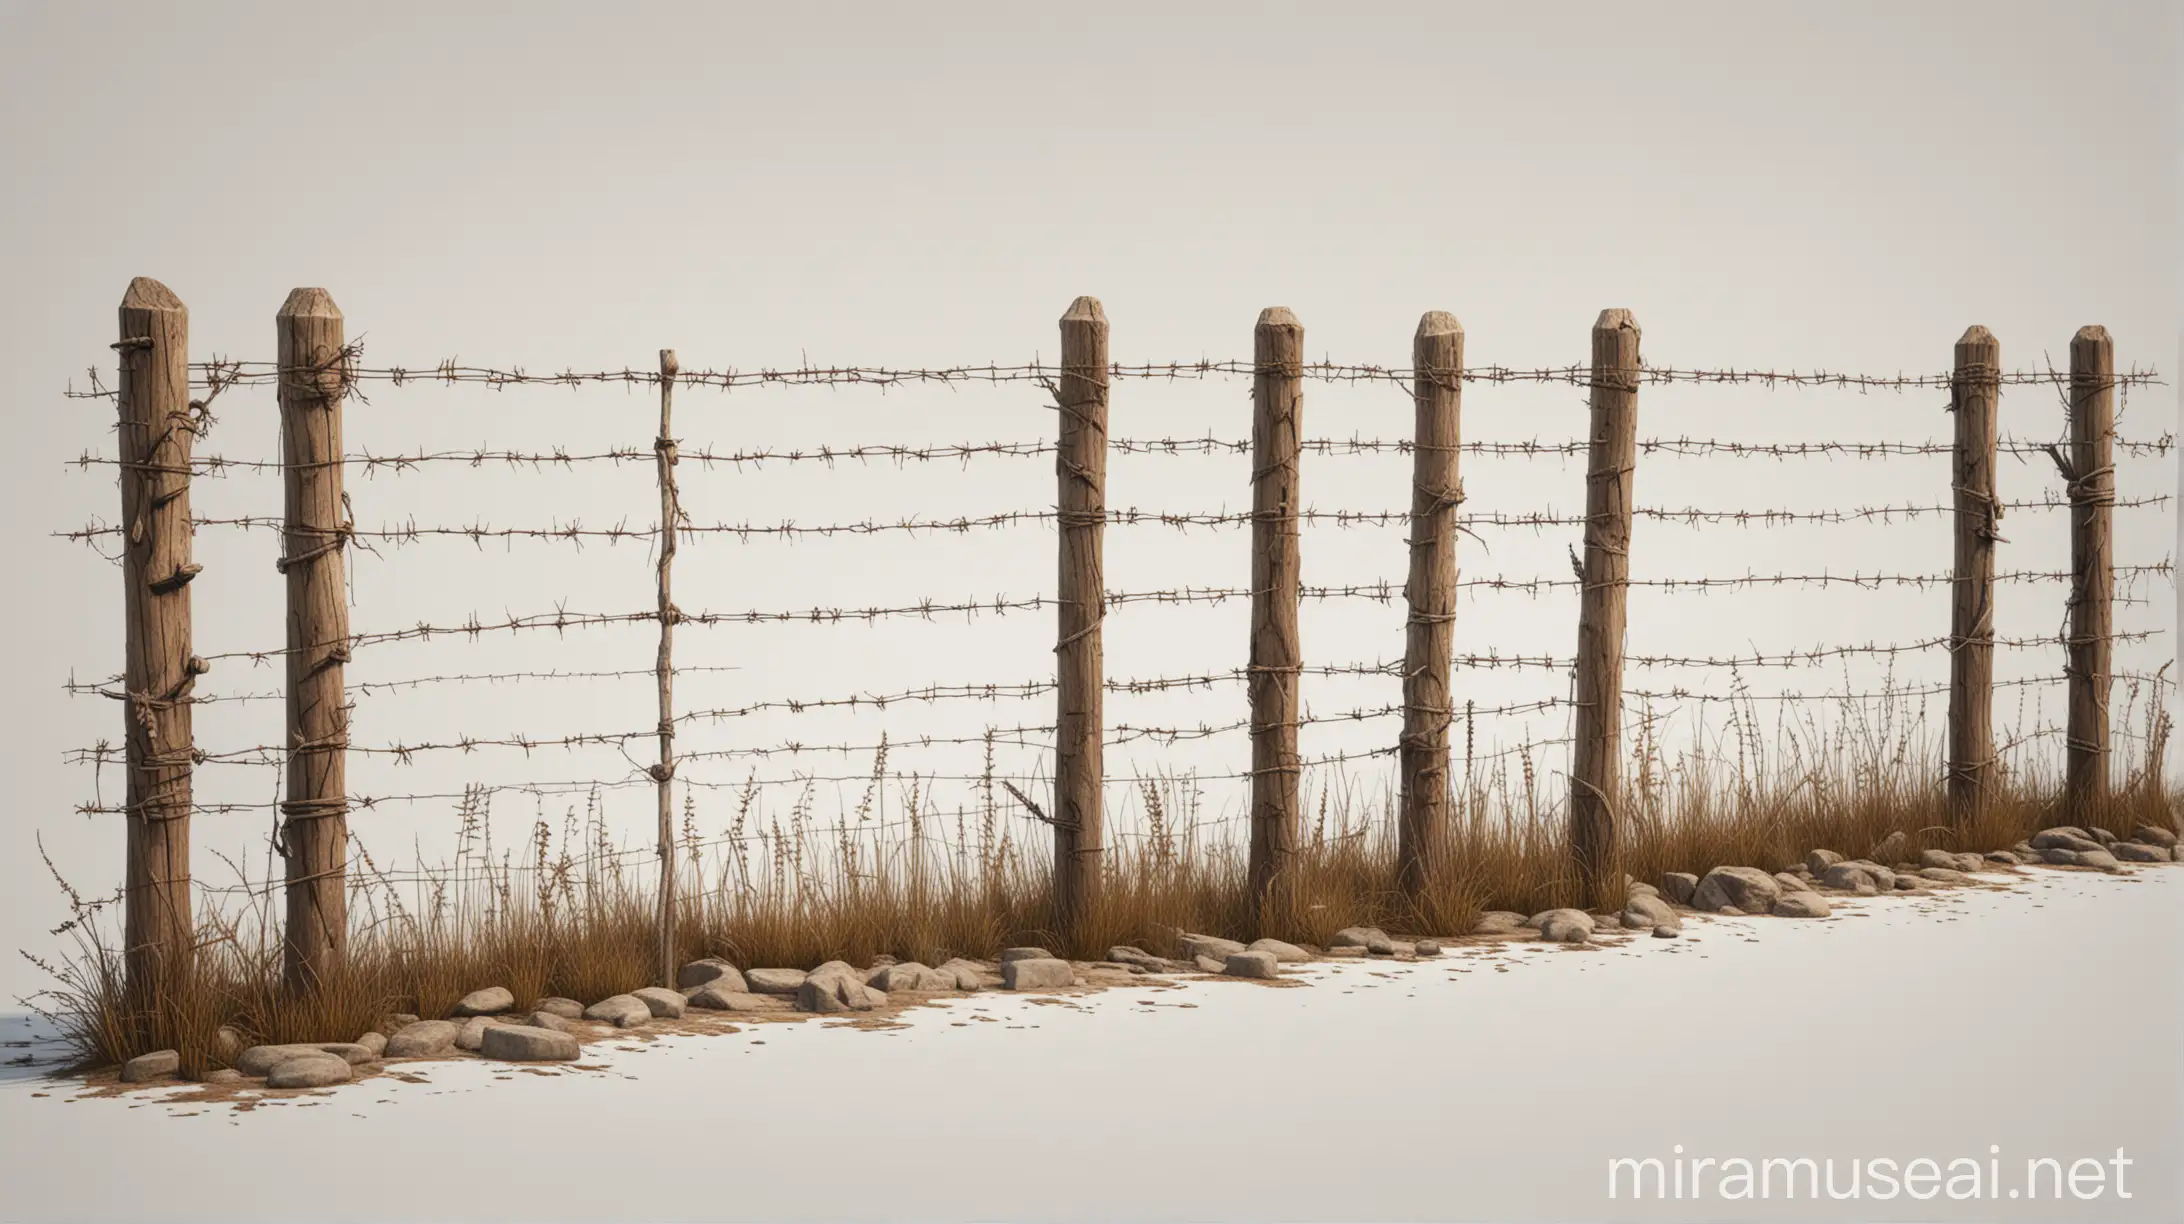 barbed wire Fence with large gaps and rounded wooden posts connected by wires, realistic drawing, brown colors, feather-like rendering, sketchfab, with 100% white background, sprite sheet, spread sheet of well-cut fence realistic drawing, in a front view perspective